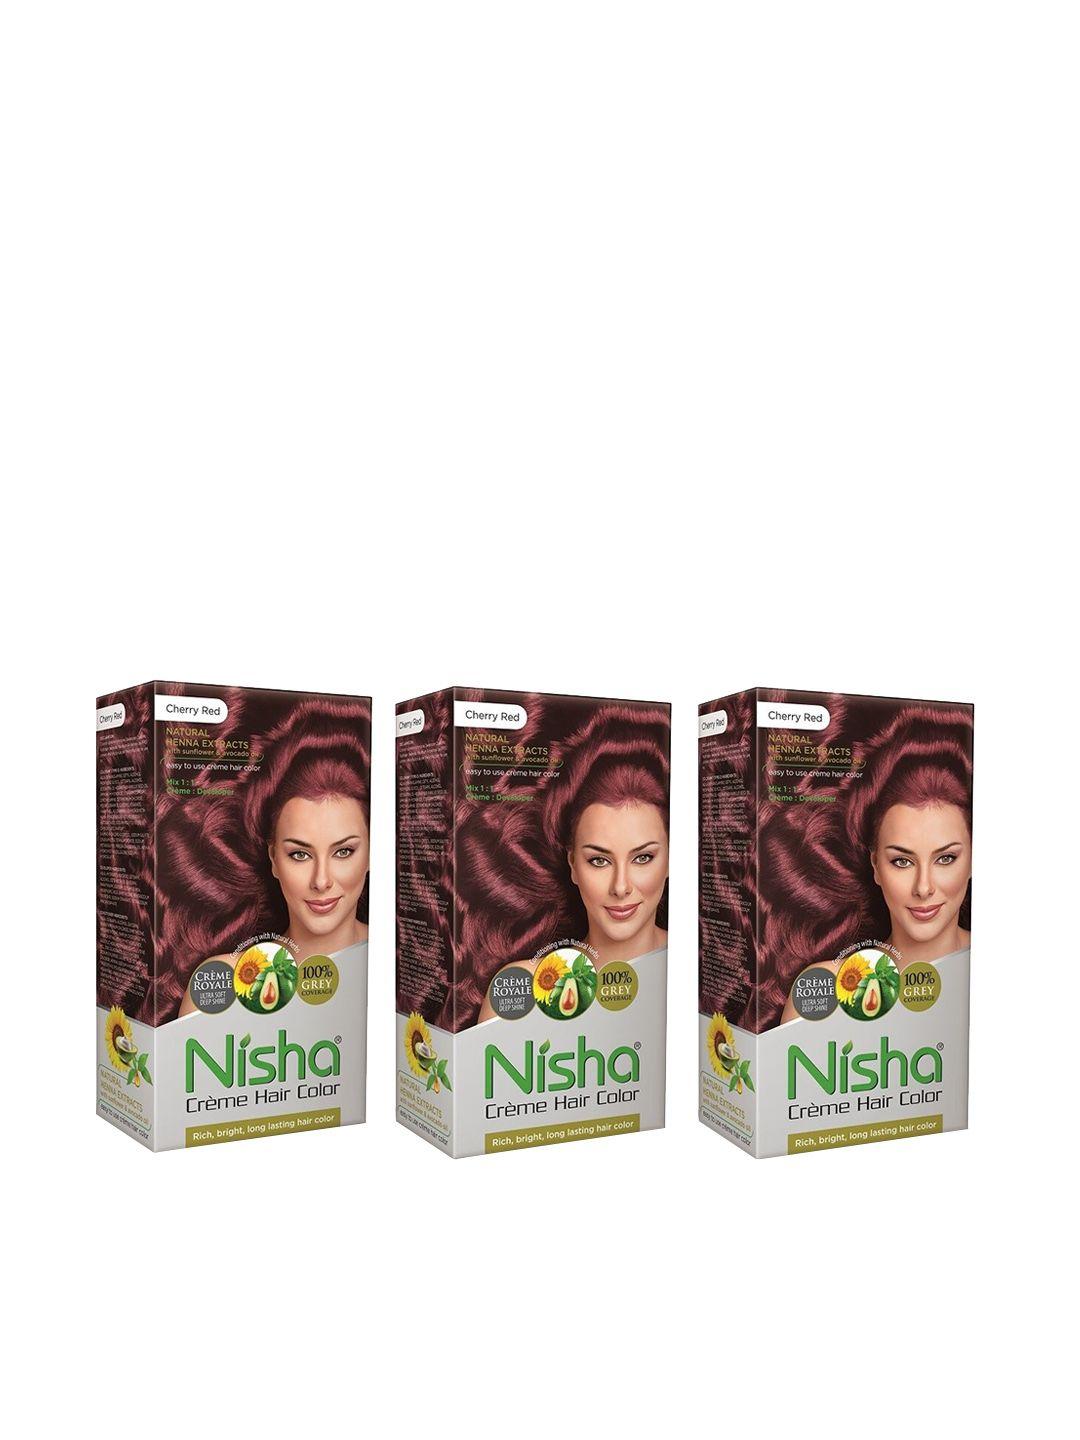 nisha unisex red pack of 3 creme hair color 120gm each- cherry red